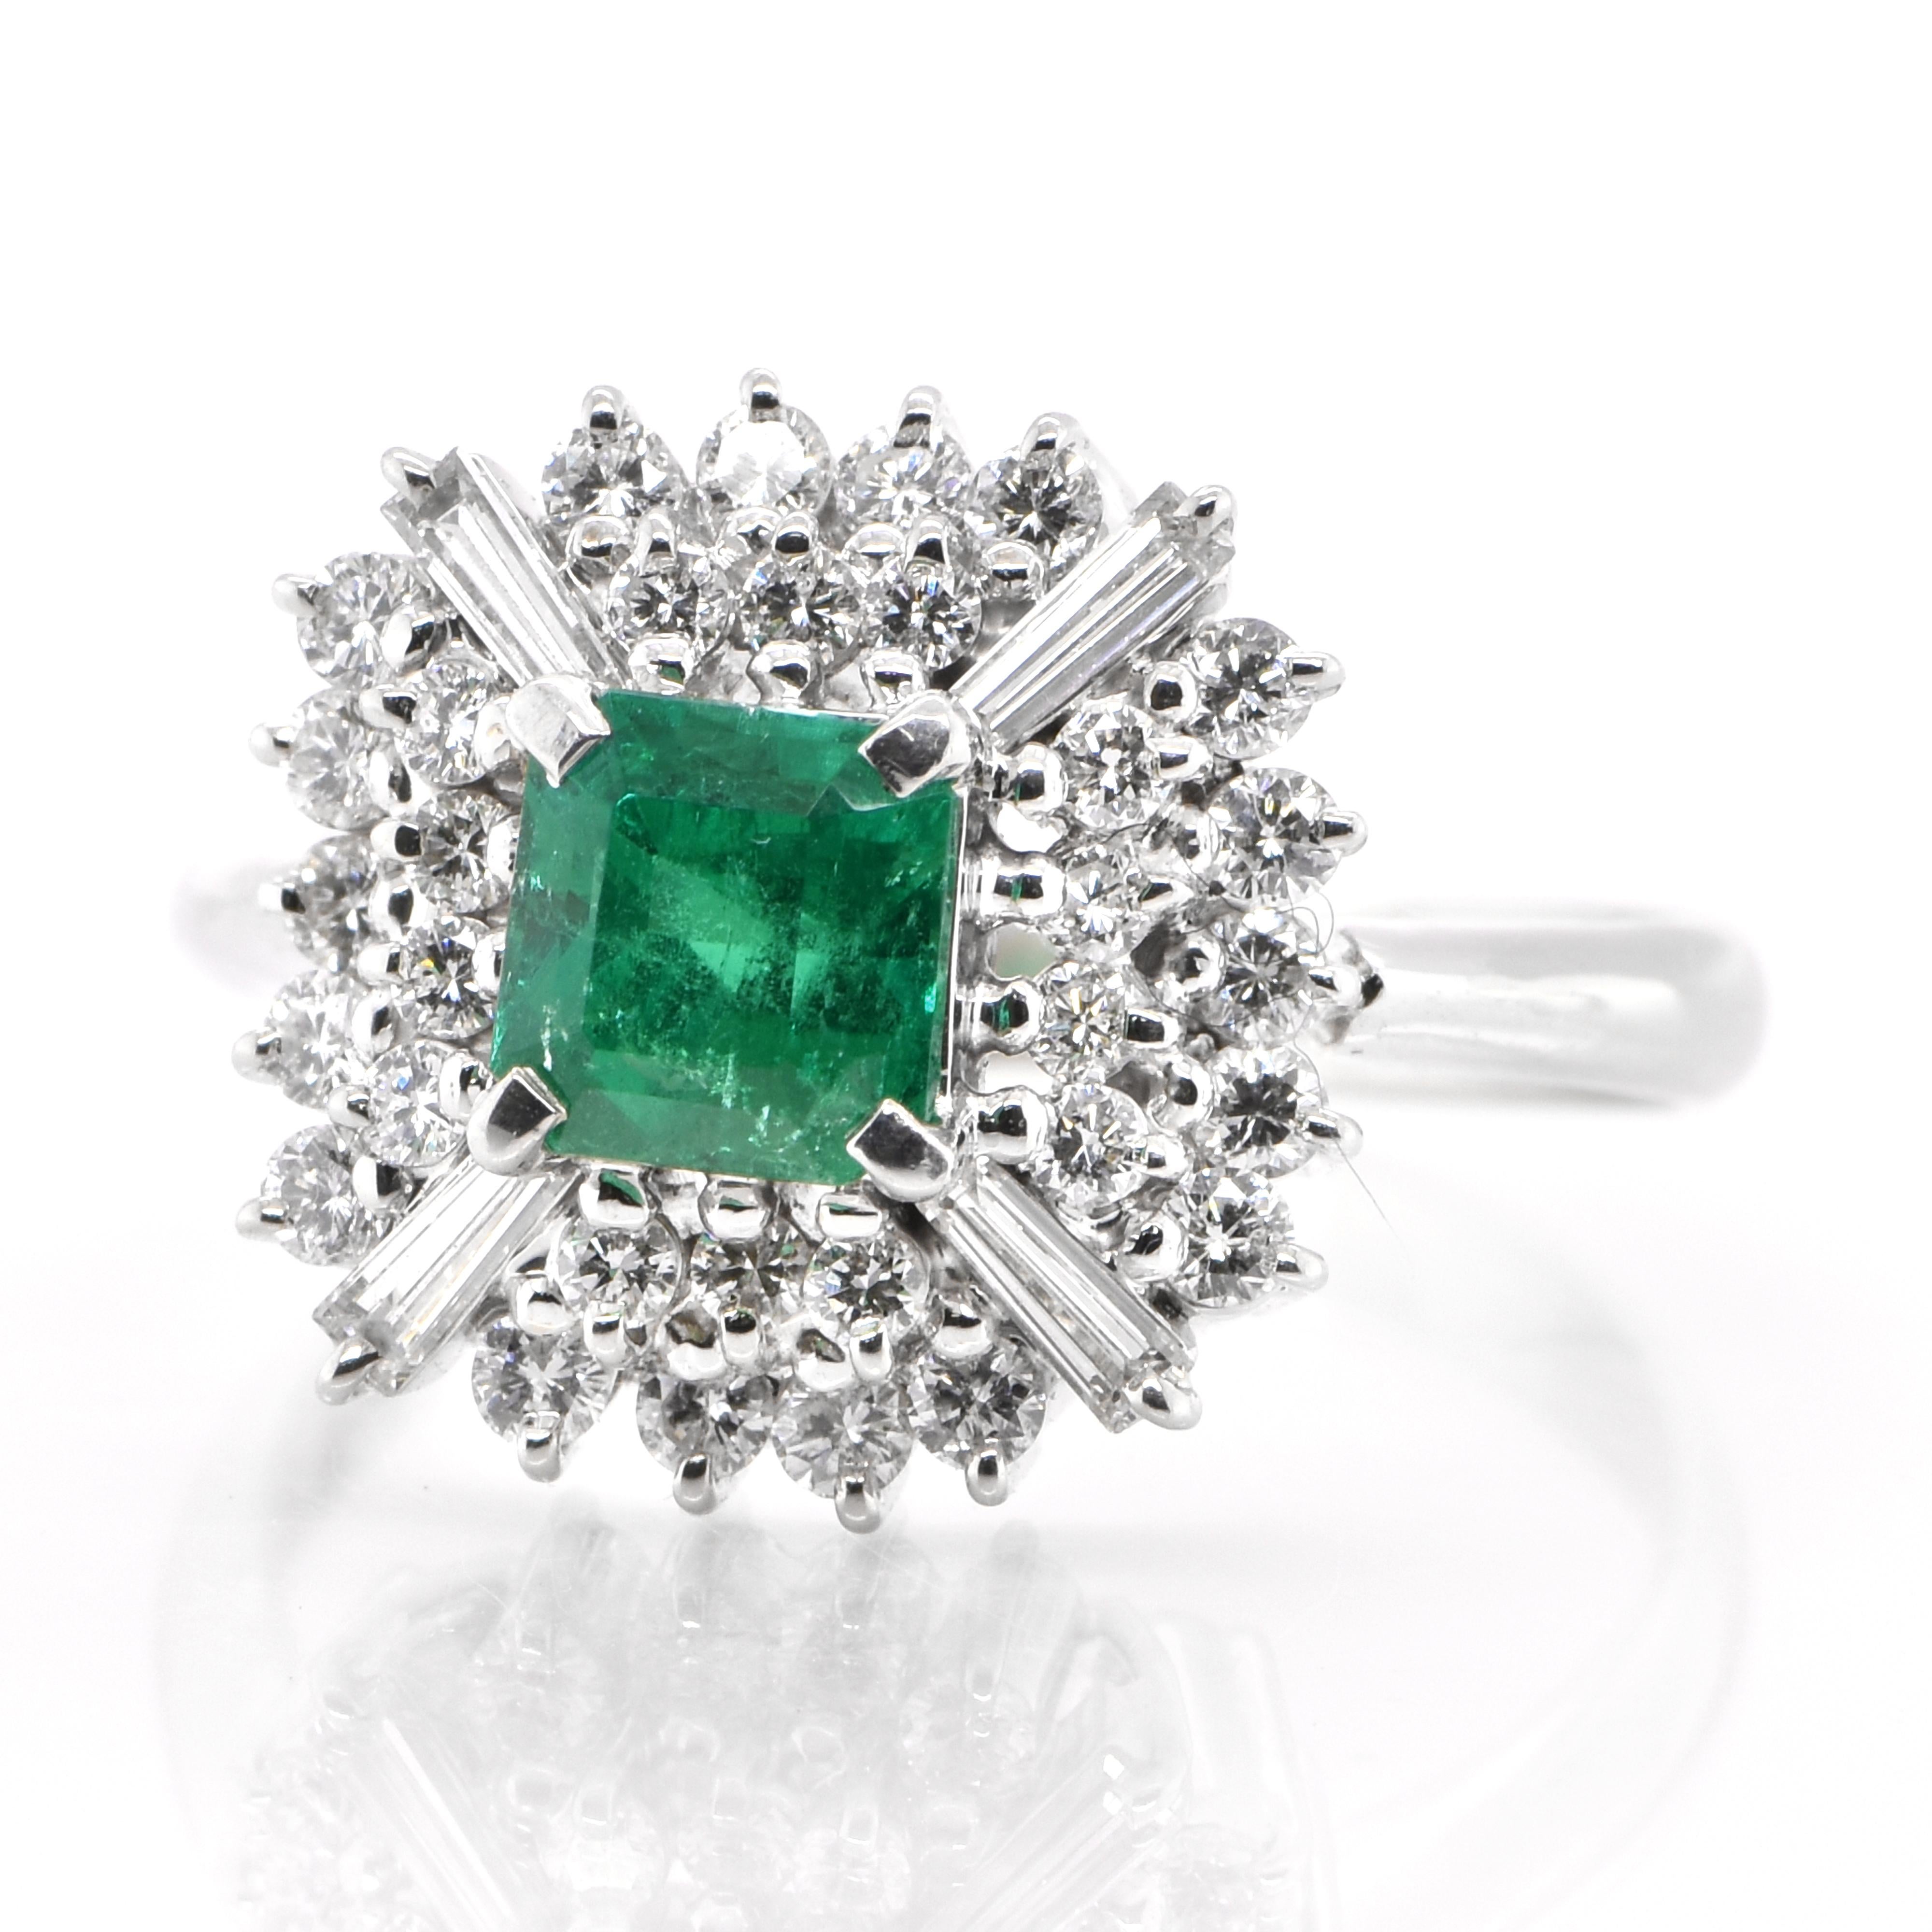 A stunning Art Deco inspired Ring featuring a 0.41 Carat Natural Emerald and 0.90 Carats of Diamond Accents set in Platinum. People have admired emerald’s green for thousands of years. Emeralds have always been associated with the lushest landscapes